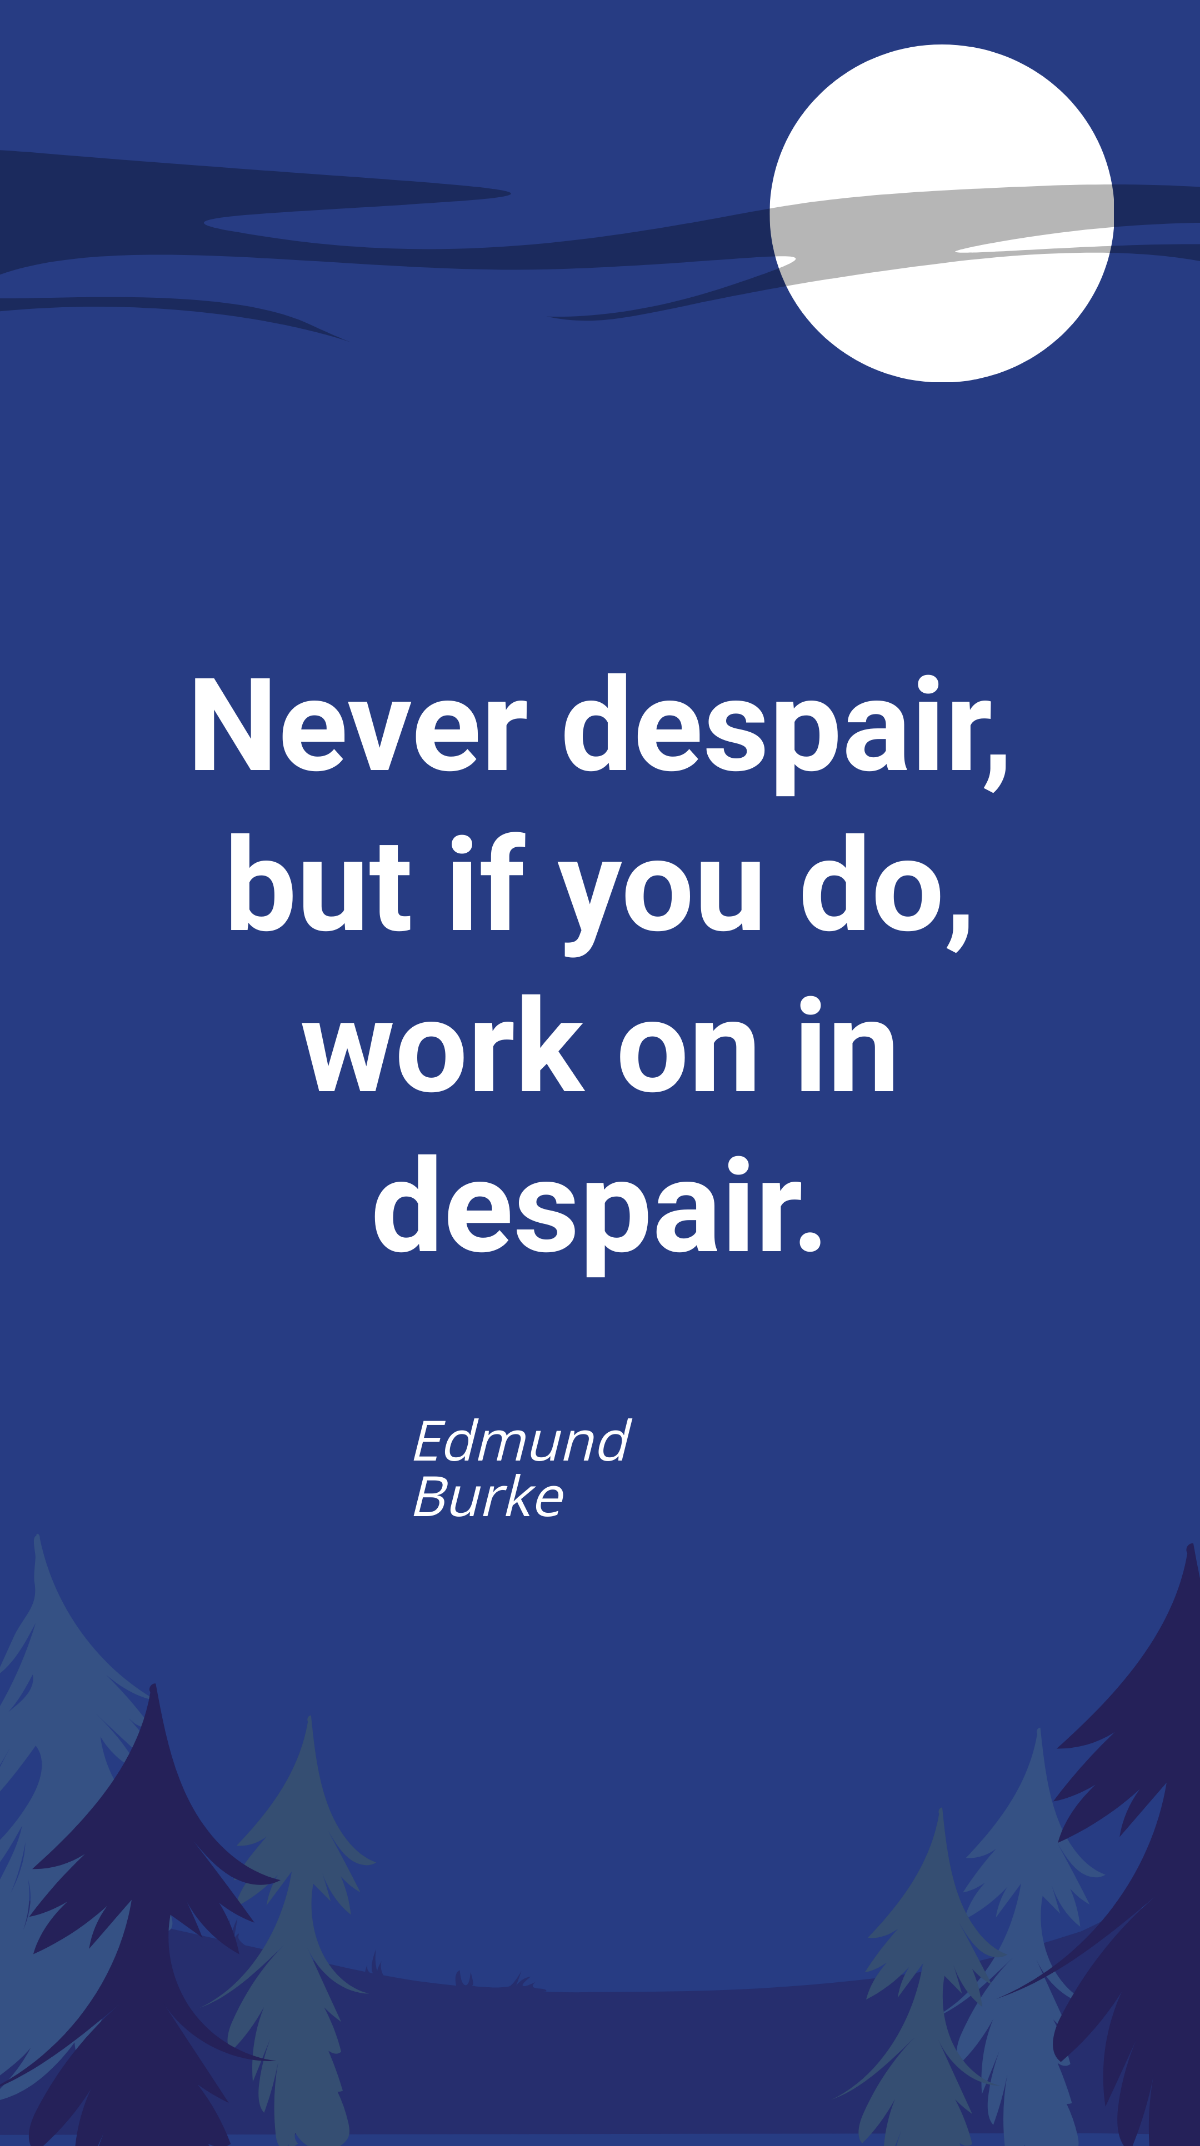 Edmund Burke-Never despair, but if you do, work on in despair. Template